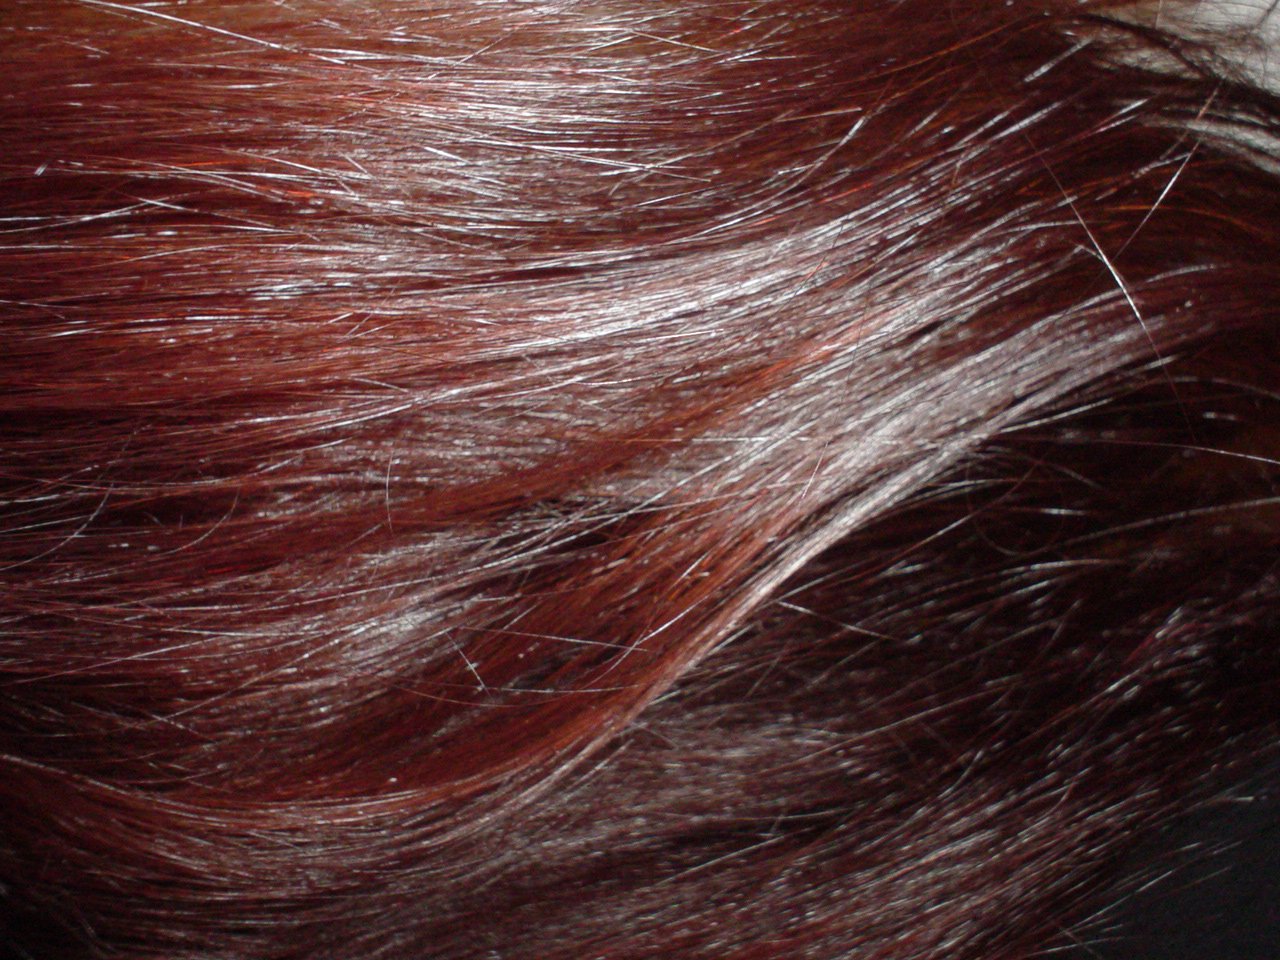 a red hair with some white streaks in it